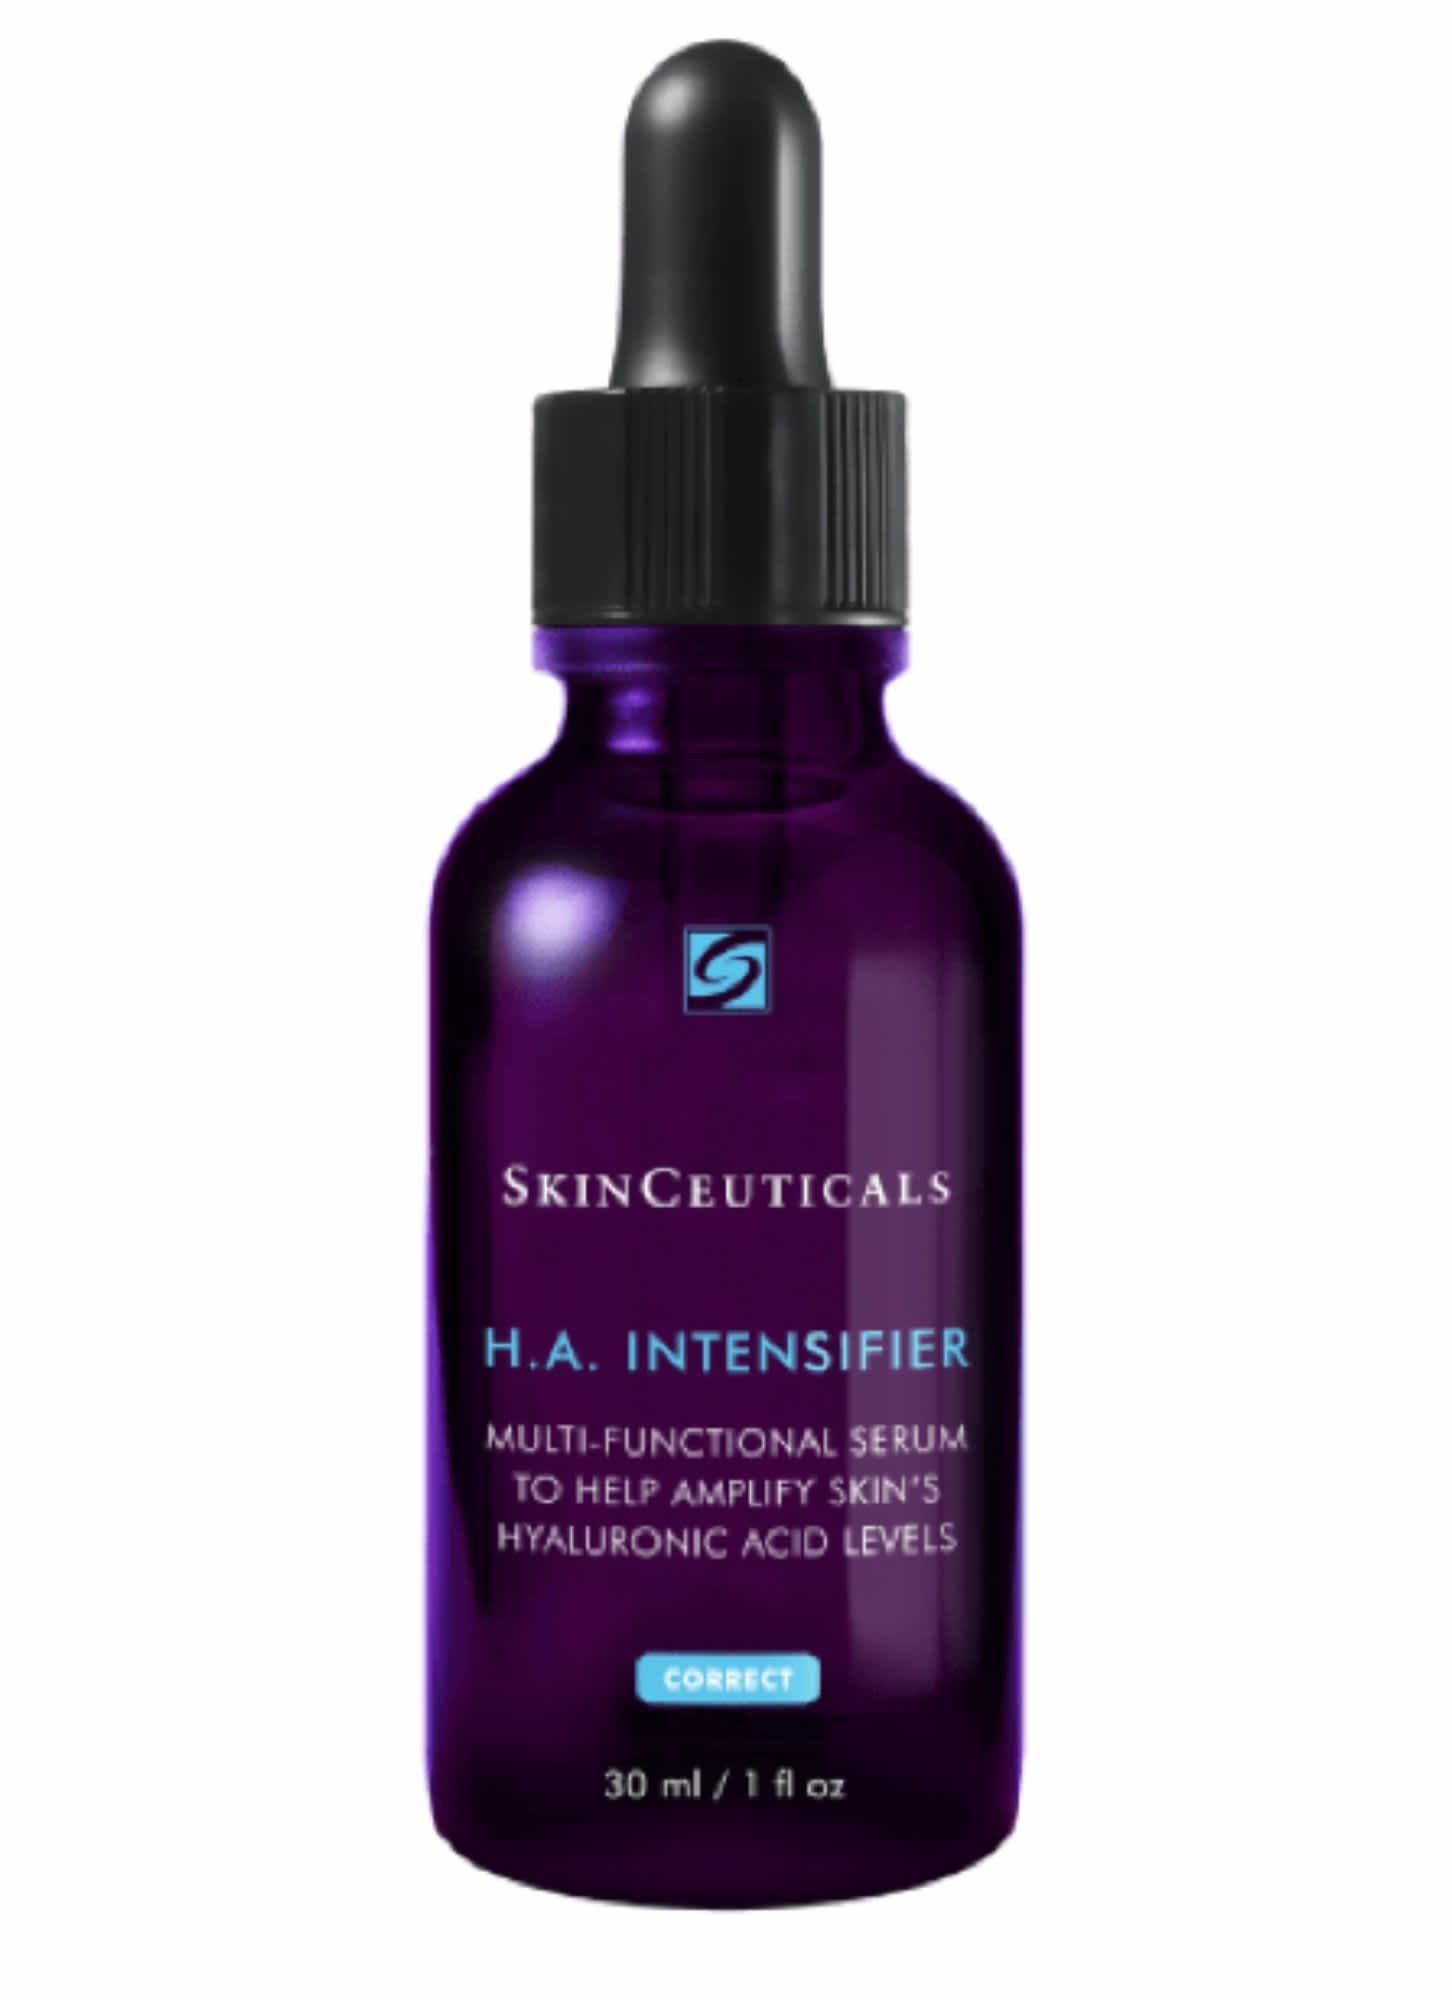 Skinceuticals, H.A. Intensifier Serum, ($155) currently on 20% discount at Adore Beauty 